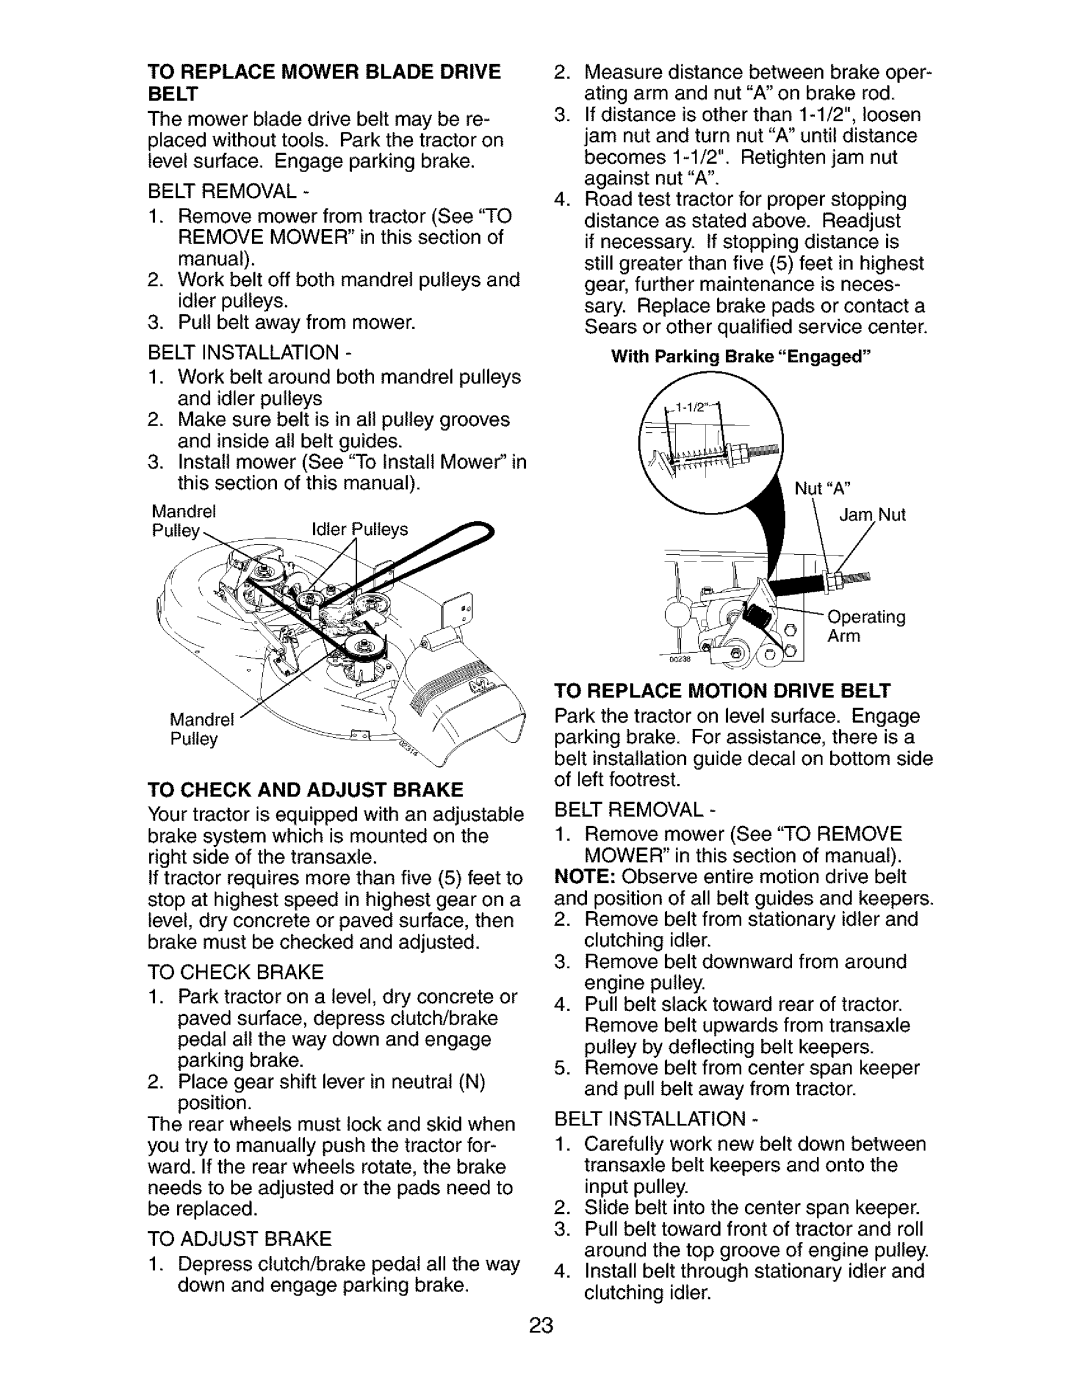 Craftsman 917.273392 manual To Check And Adjust Brake, To Replace Motion Drive Belt 